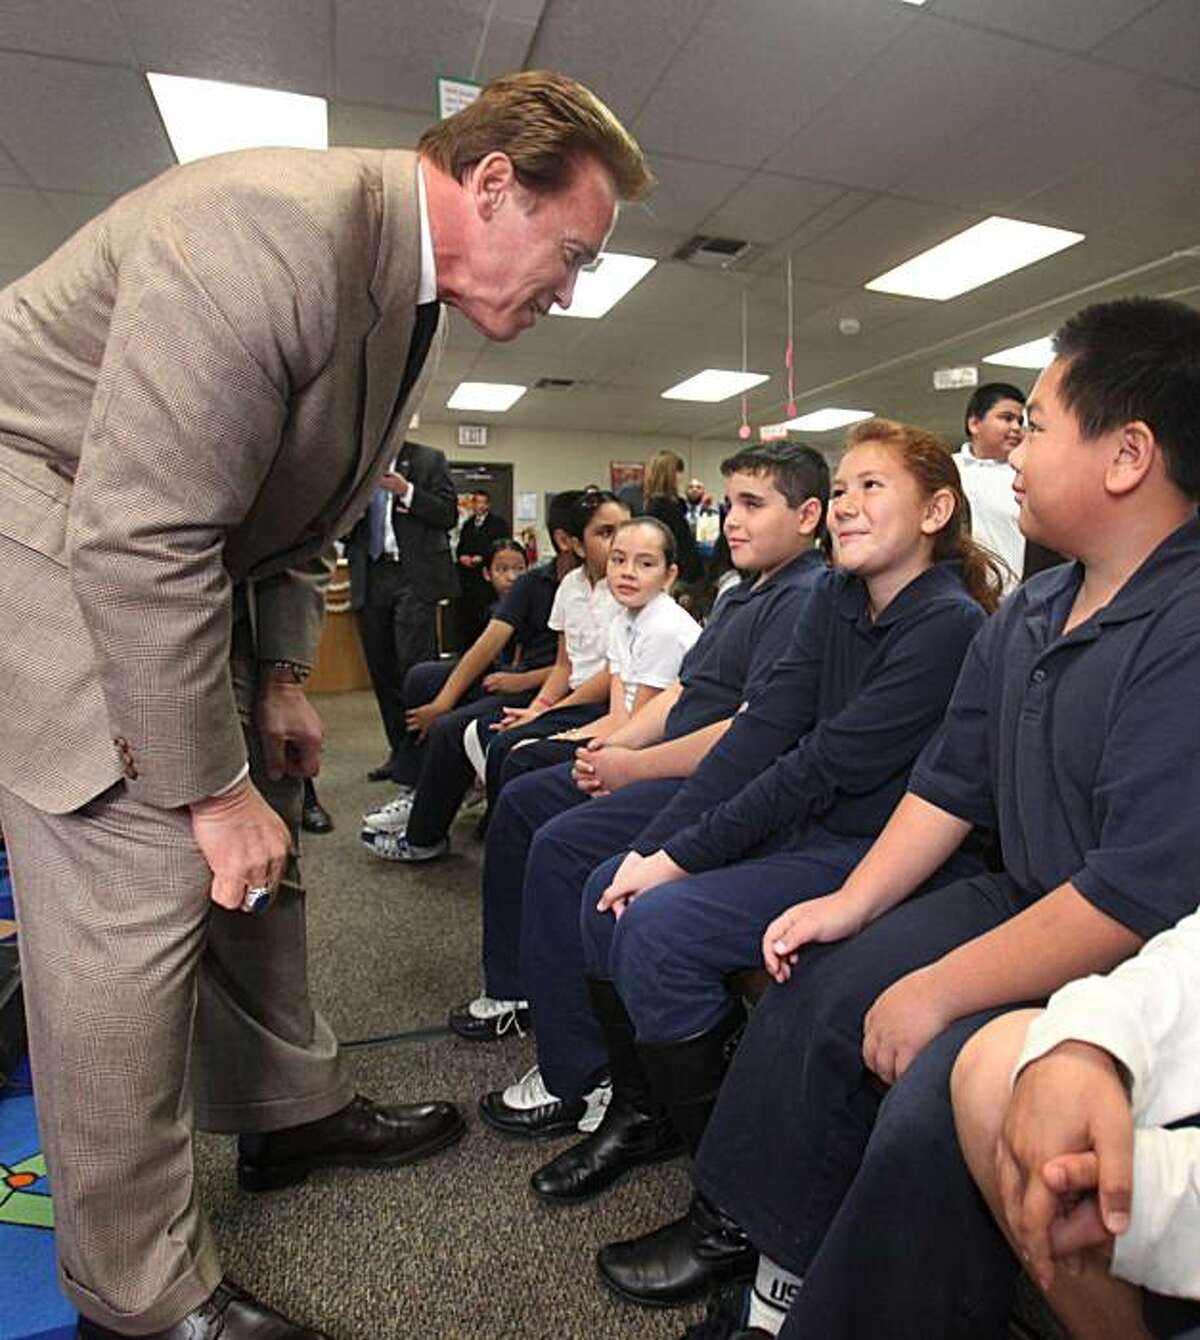 Gov. Arnold Schwarzenegger talks with fifth-grader Emyly Lua, 10, after holding a news conference at Noralto Elementary School in Sacramento, Calif., Tuesday, Dec. 8, 2009. Schwarzenegger visited the school where he called on the Legislature to approve a education reform package. (AP Photo/Rich Pedroncelli)